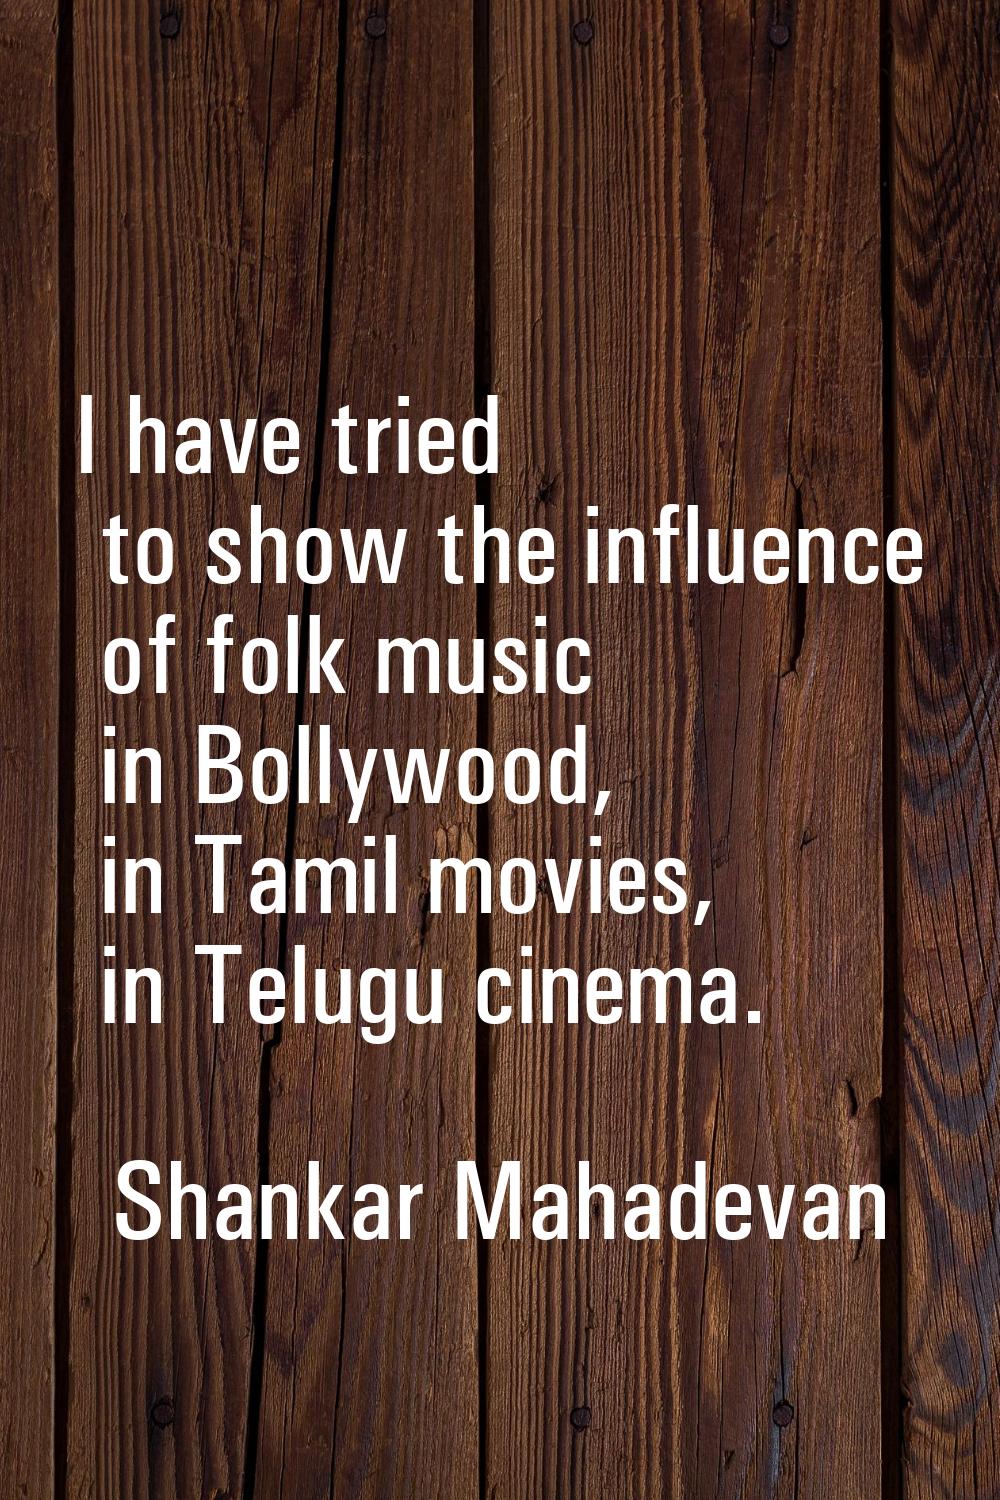 I have tried to show the influence of folk music in Bollywood, in Tamil movies, in Telugu cinema.